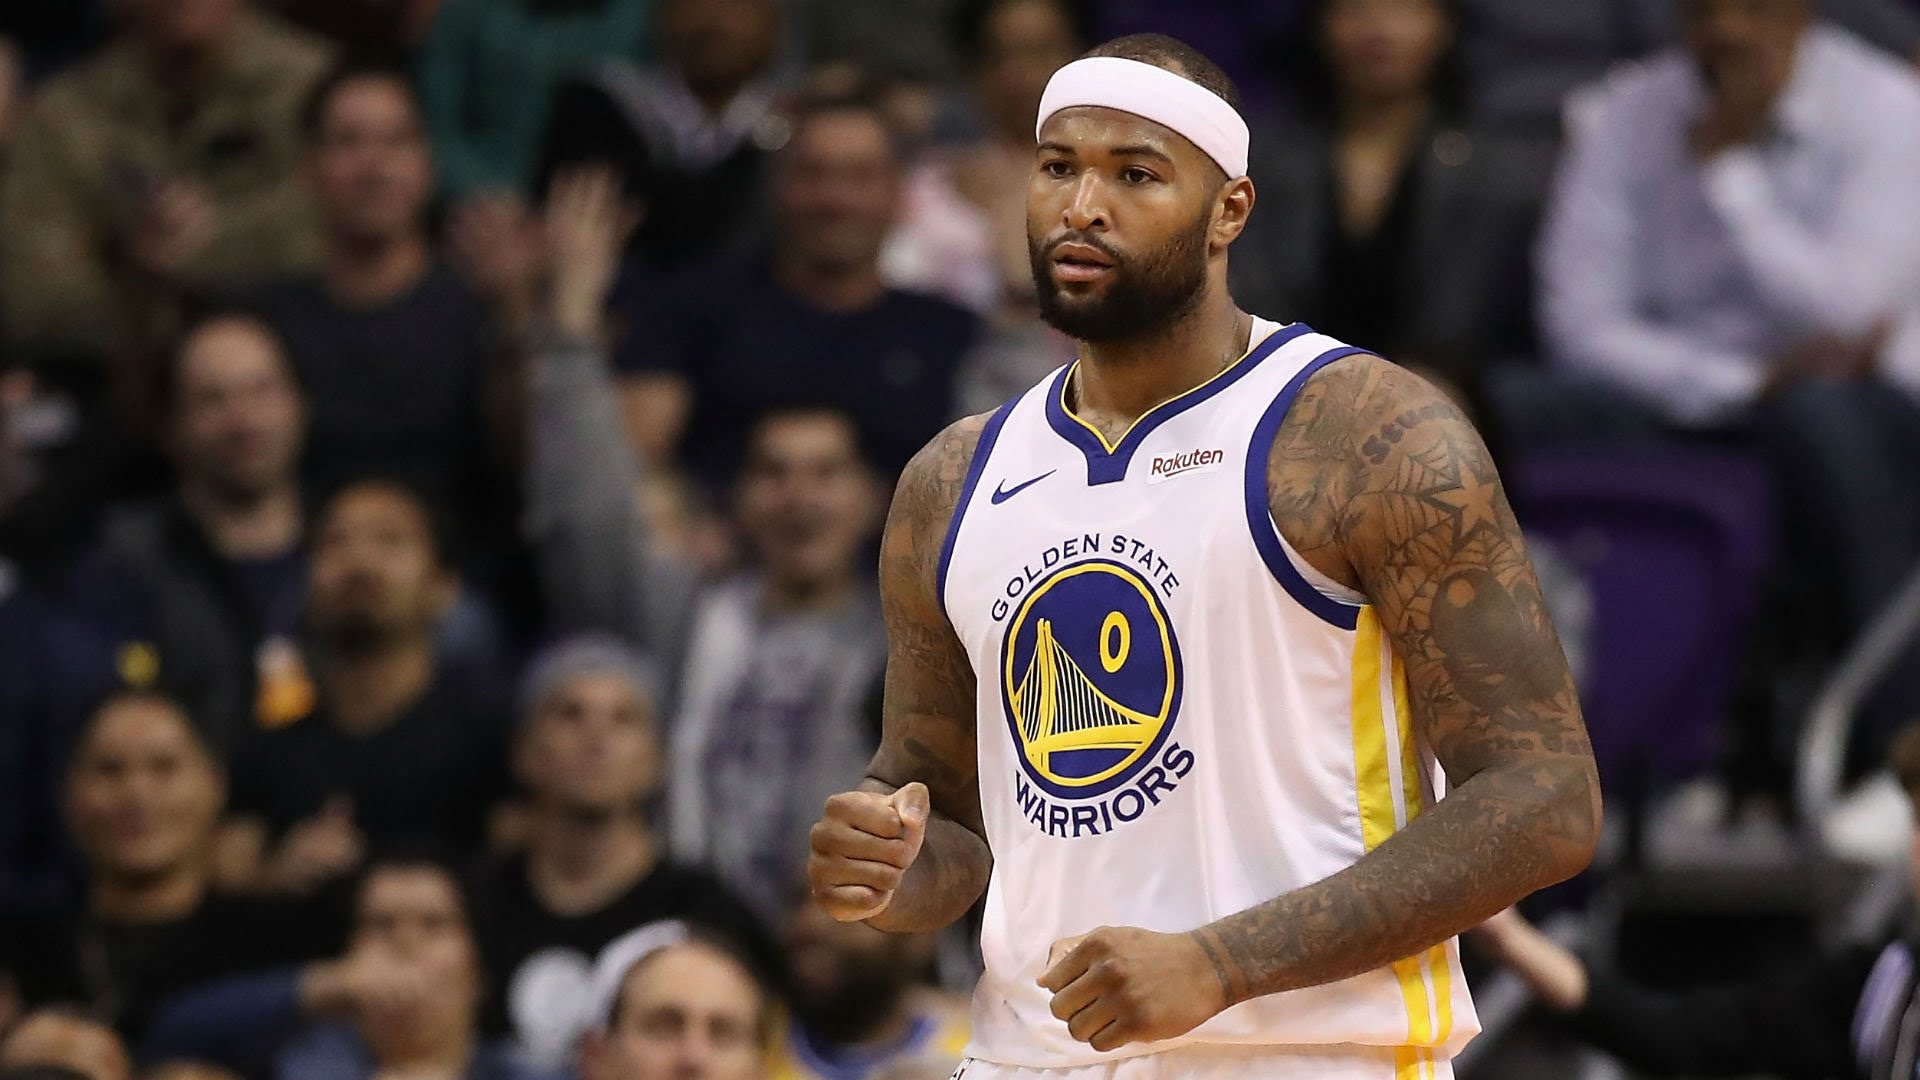 DeMarcus Cousins is the perfect move for Lakers after missing out on Kawhi Leonard1920 x 1080